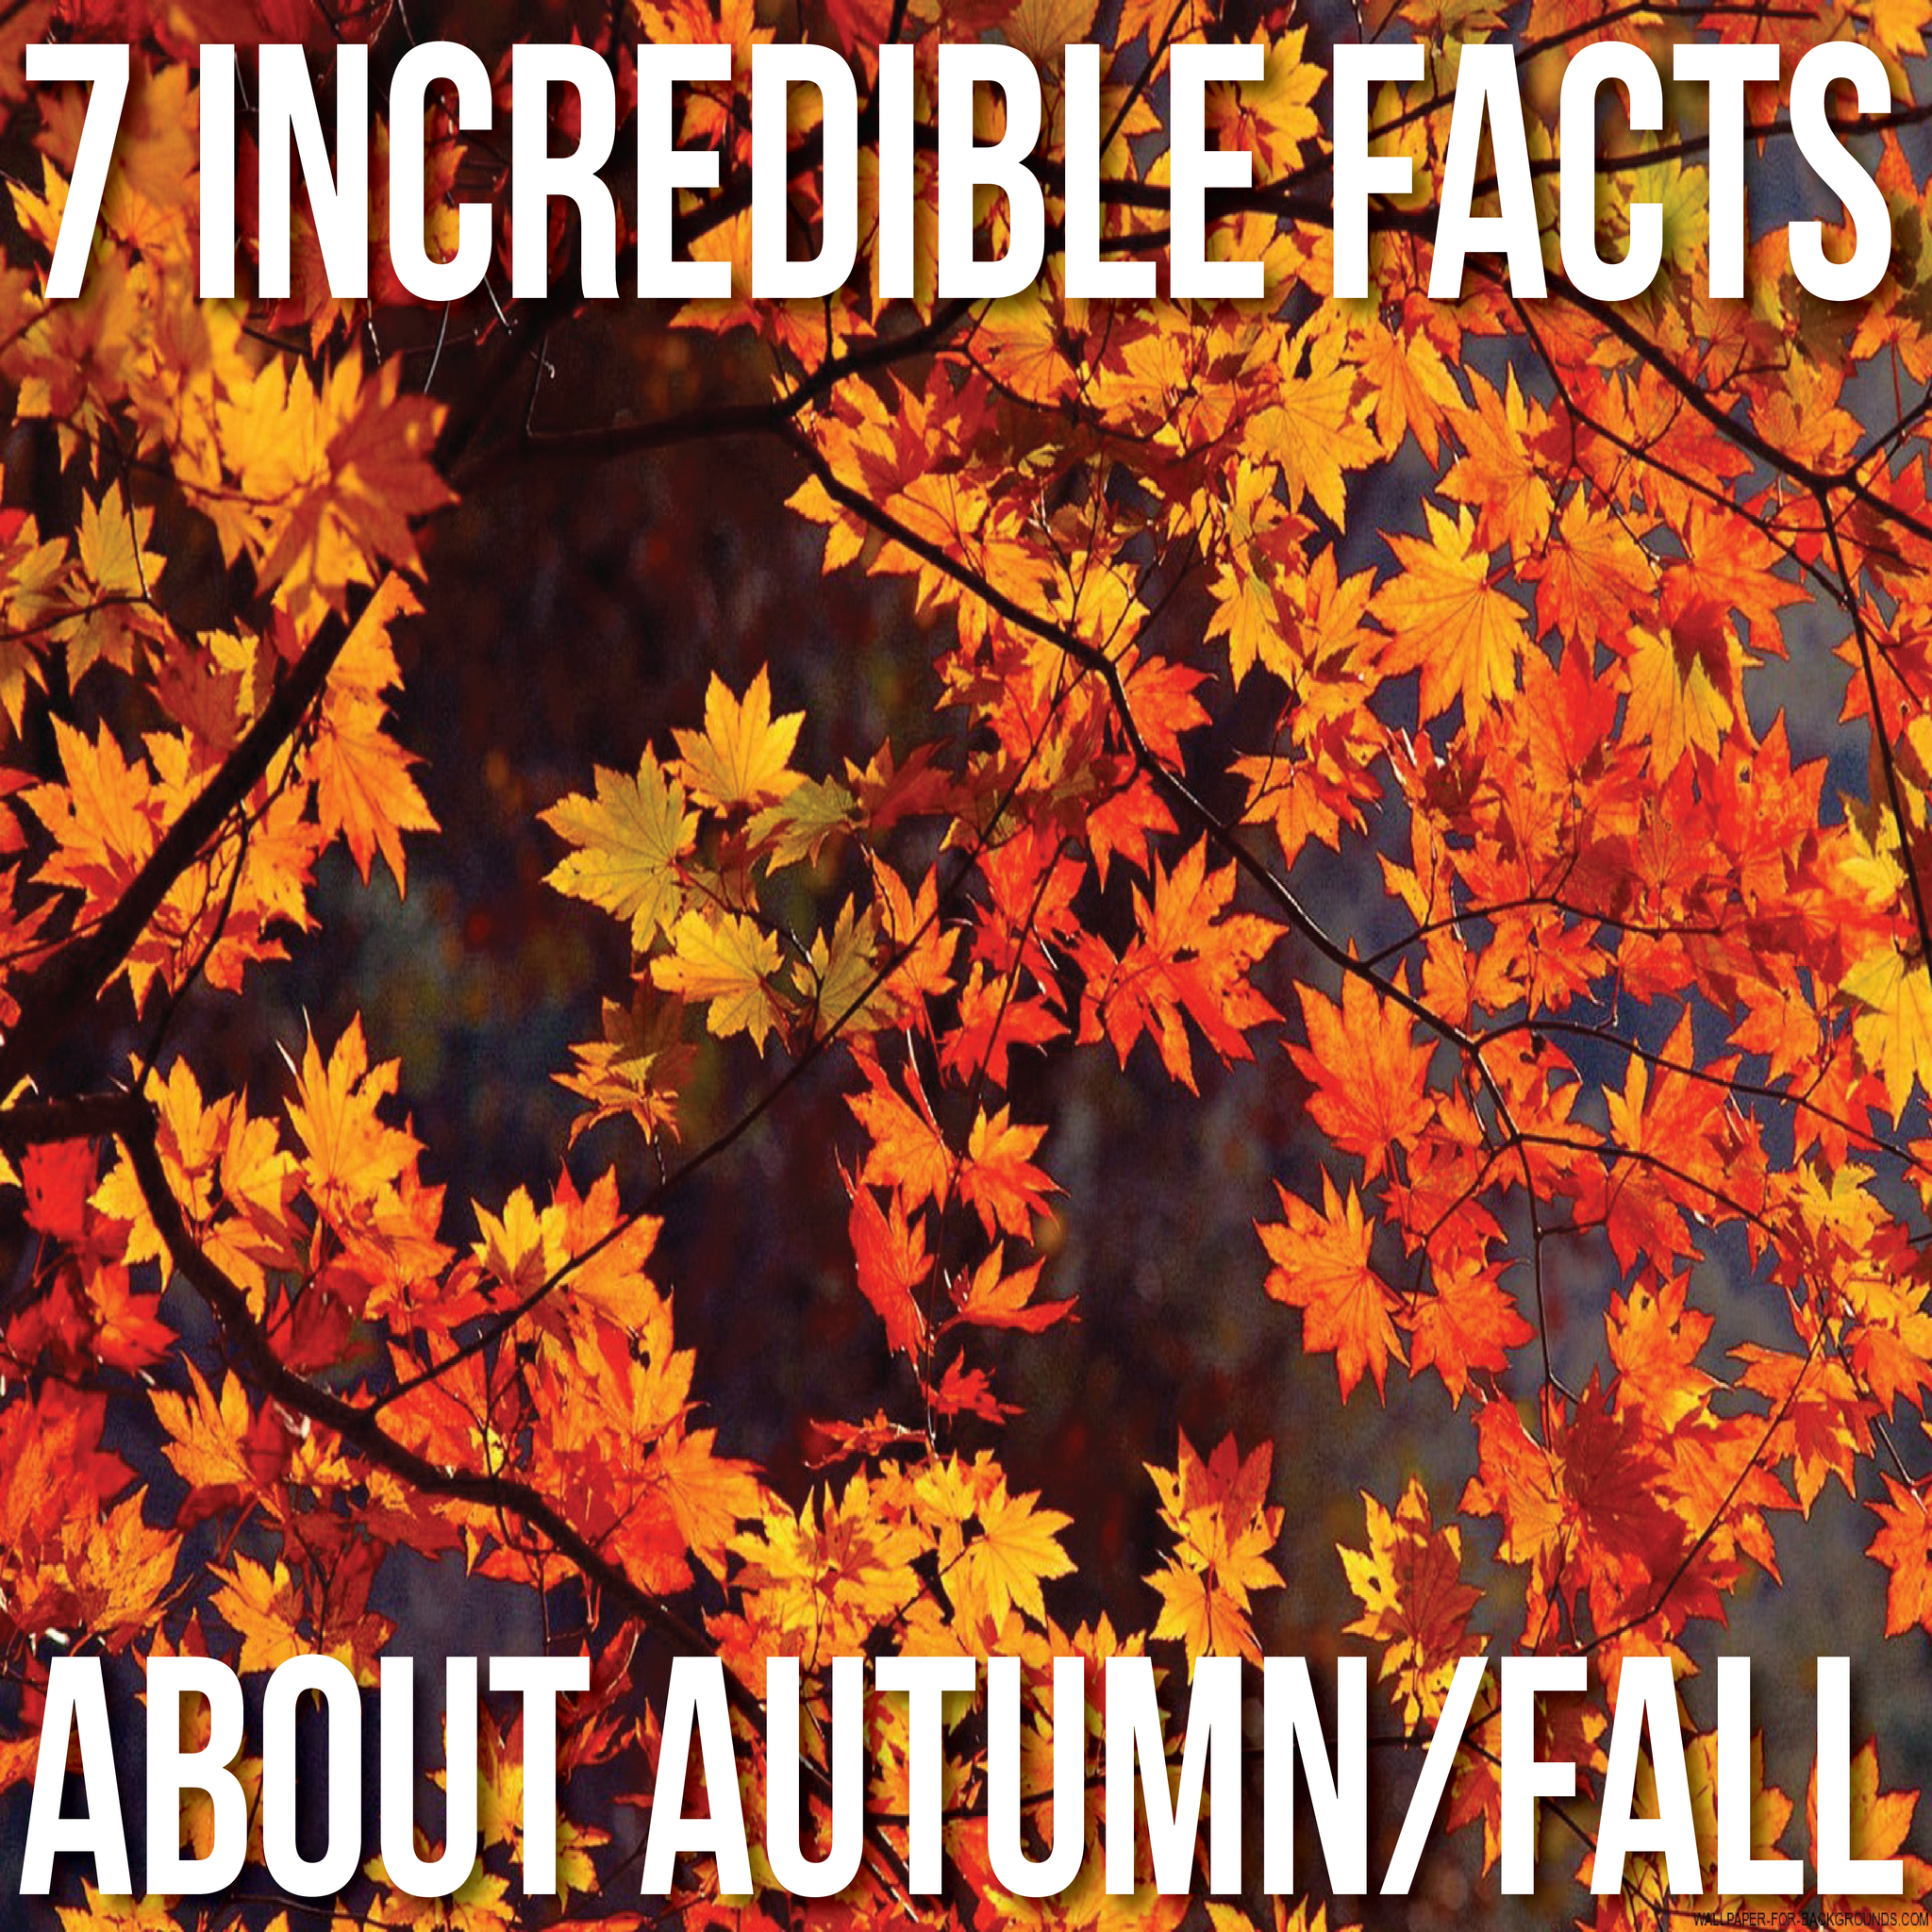 7 Incredible Facts about Autumn/Fall